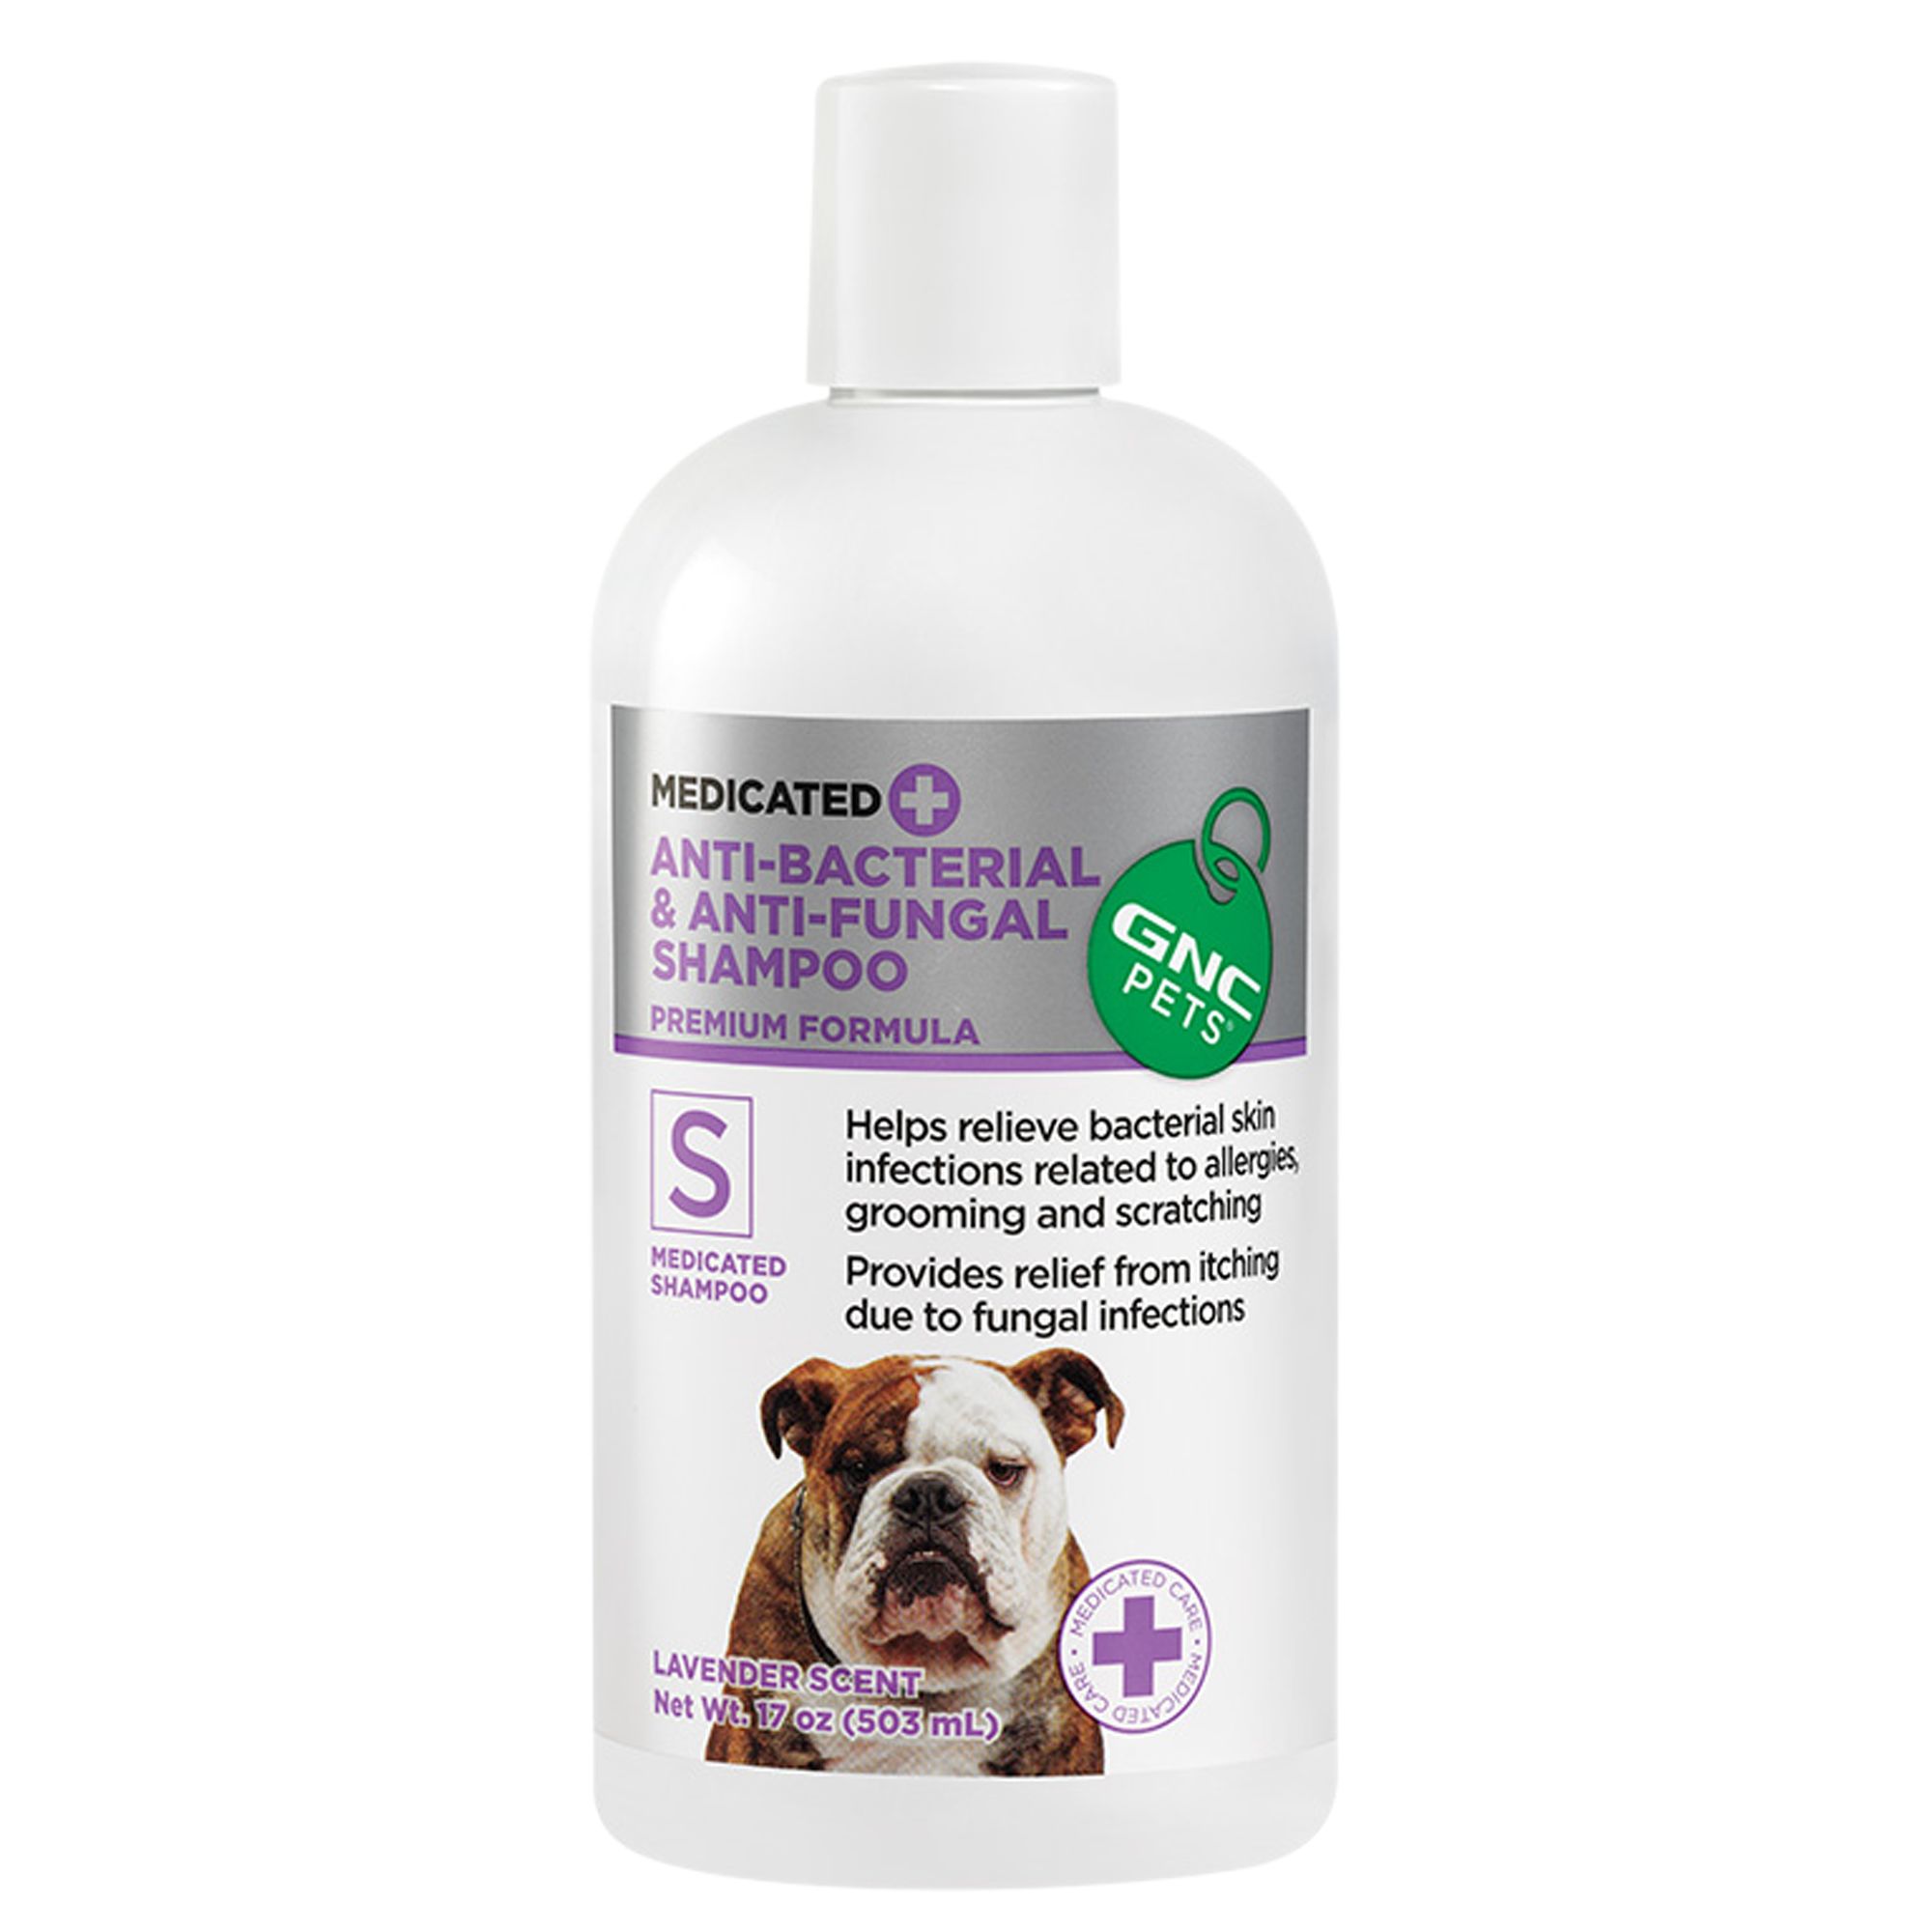 ketoconazole shampoo for dogs over the counter